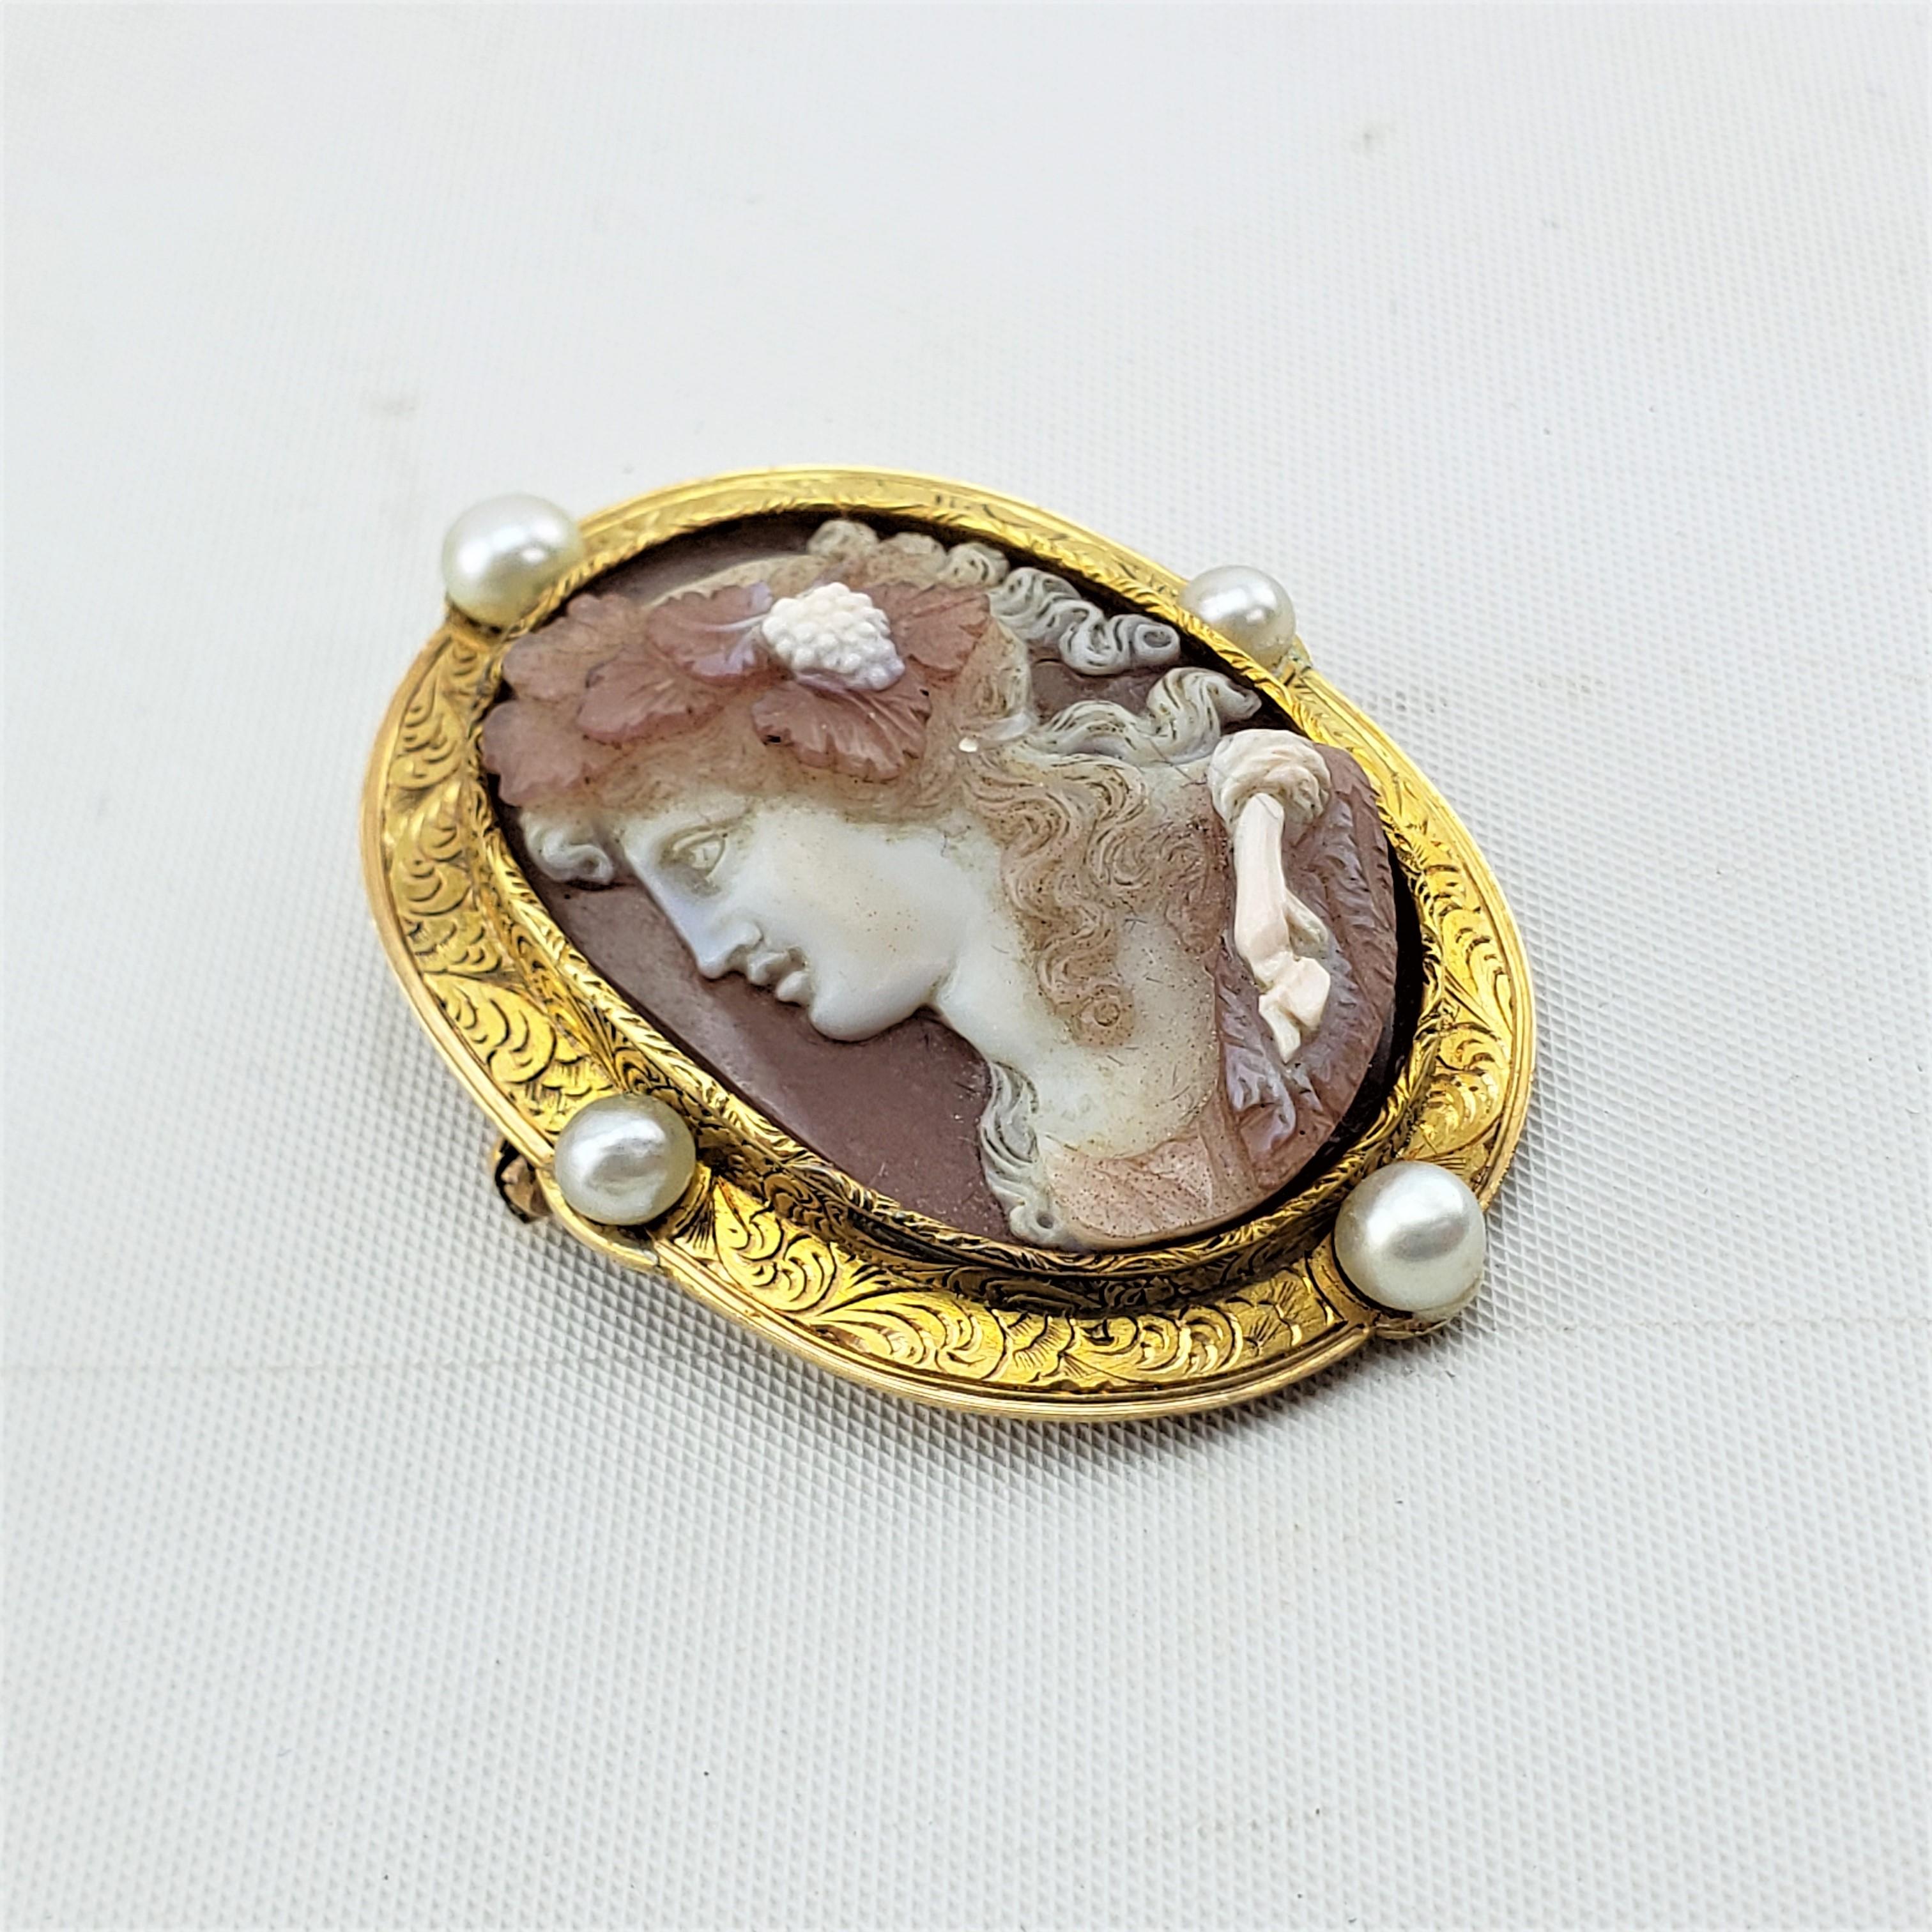 Antique 18 Karat Engraved Yellow Gold & Hand-Carved Hardstone Cameo Brooch 1